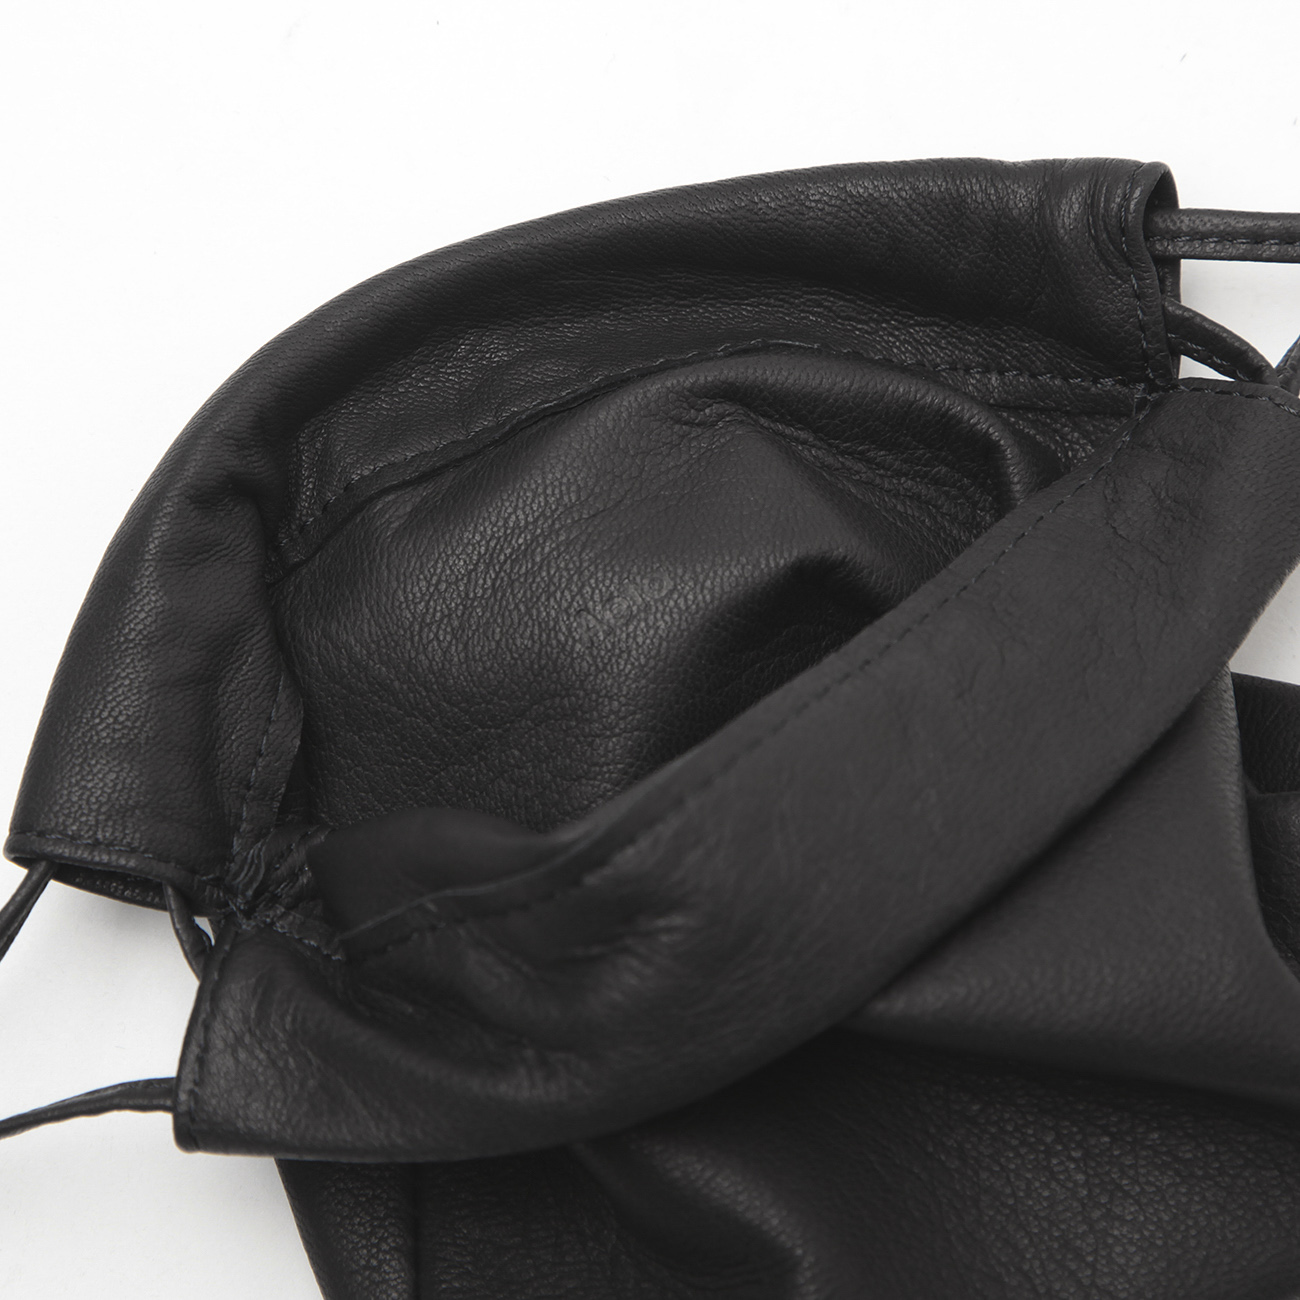 Aeta / アエタ   Double Faced DRAWSTRING POUCH : S   Black   通販